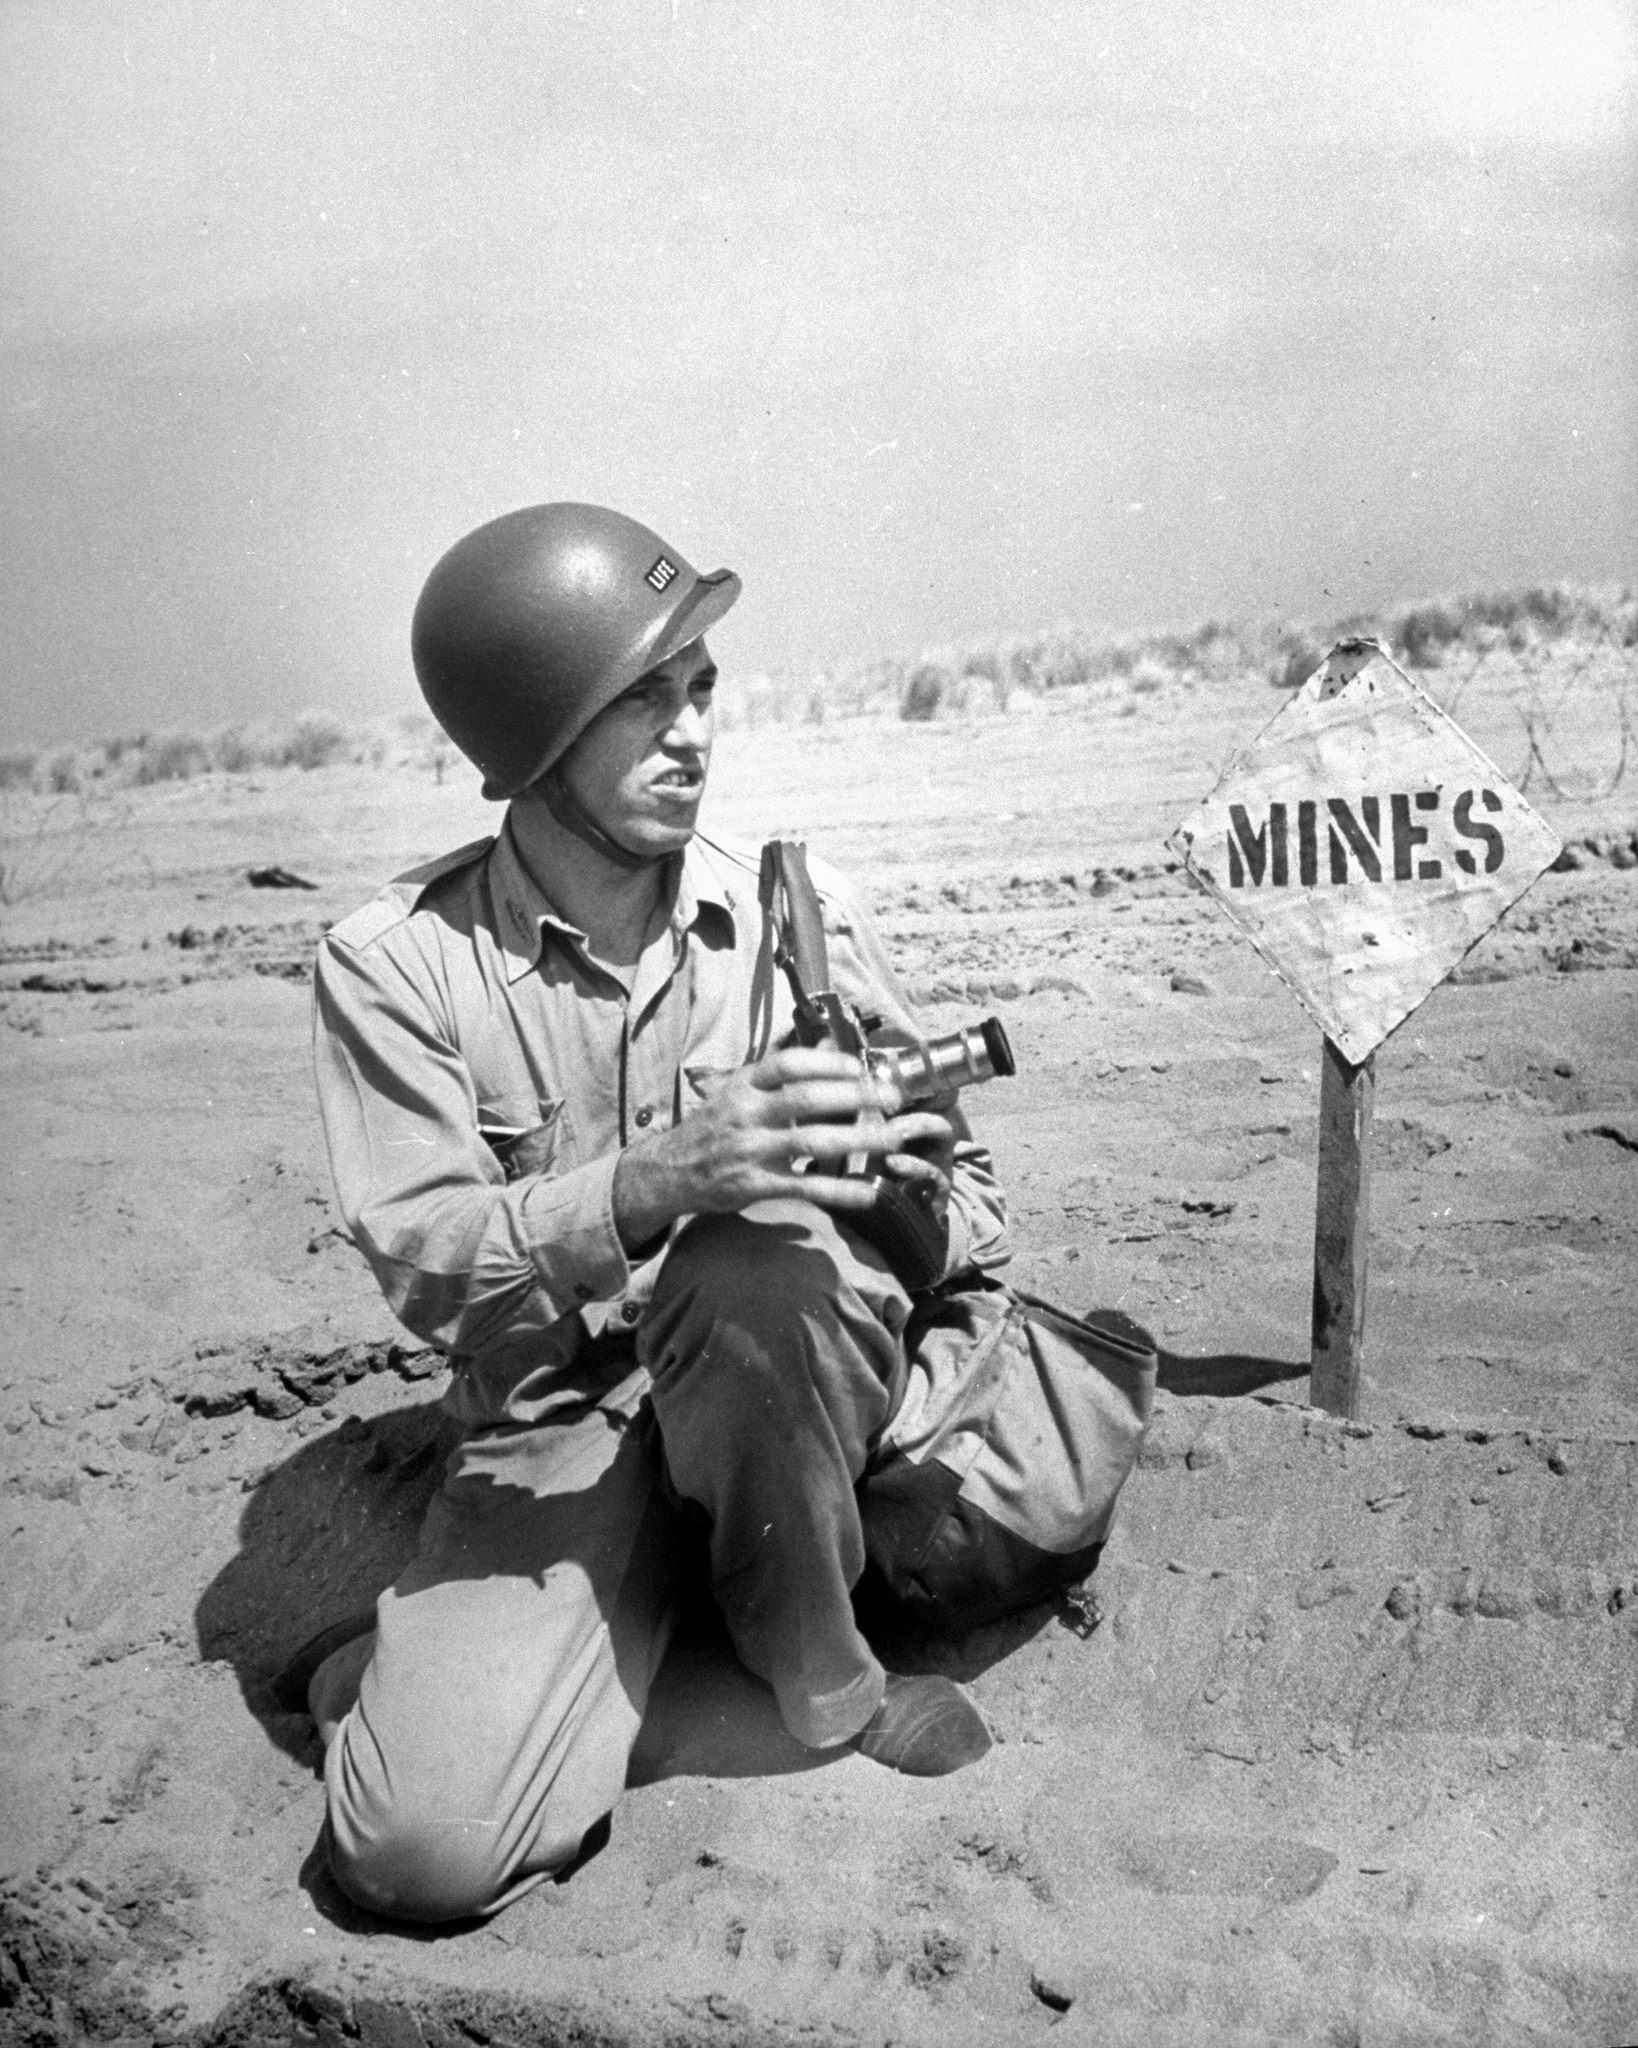 Photographer J.R. Eyerman on assignment during the Allied invasion of Salerno, Italy, 1943.